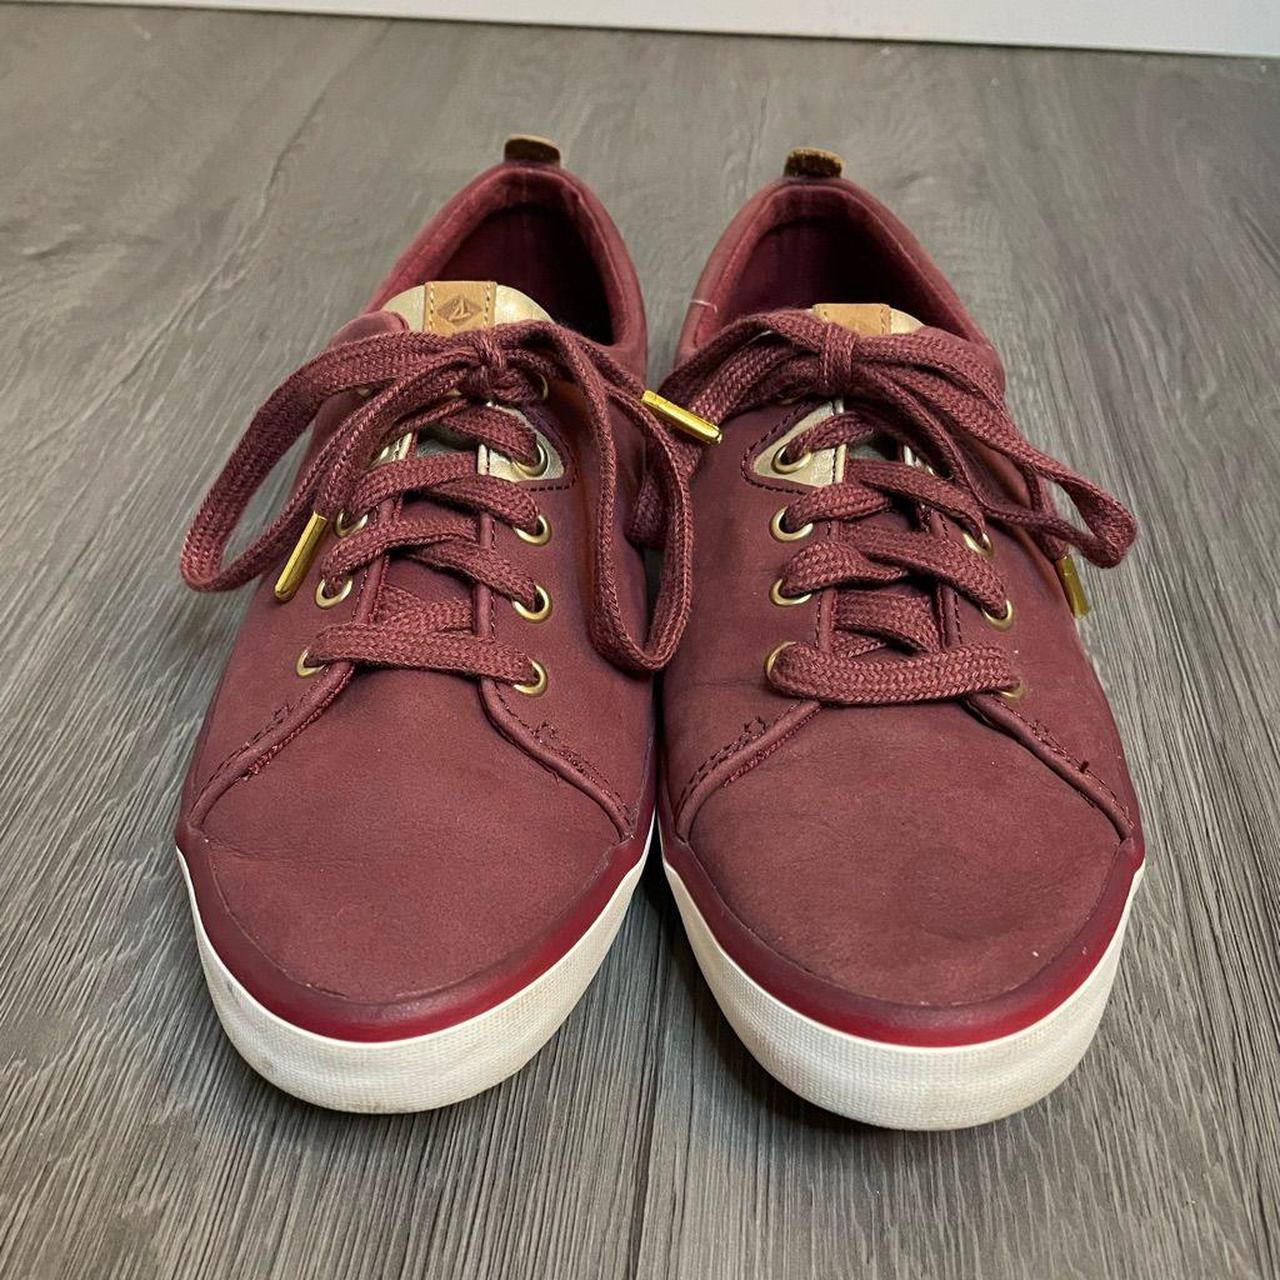 Sperry Women's Red and Gold Trainers